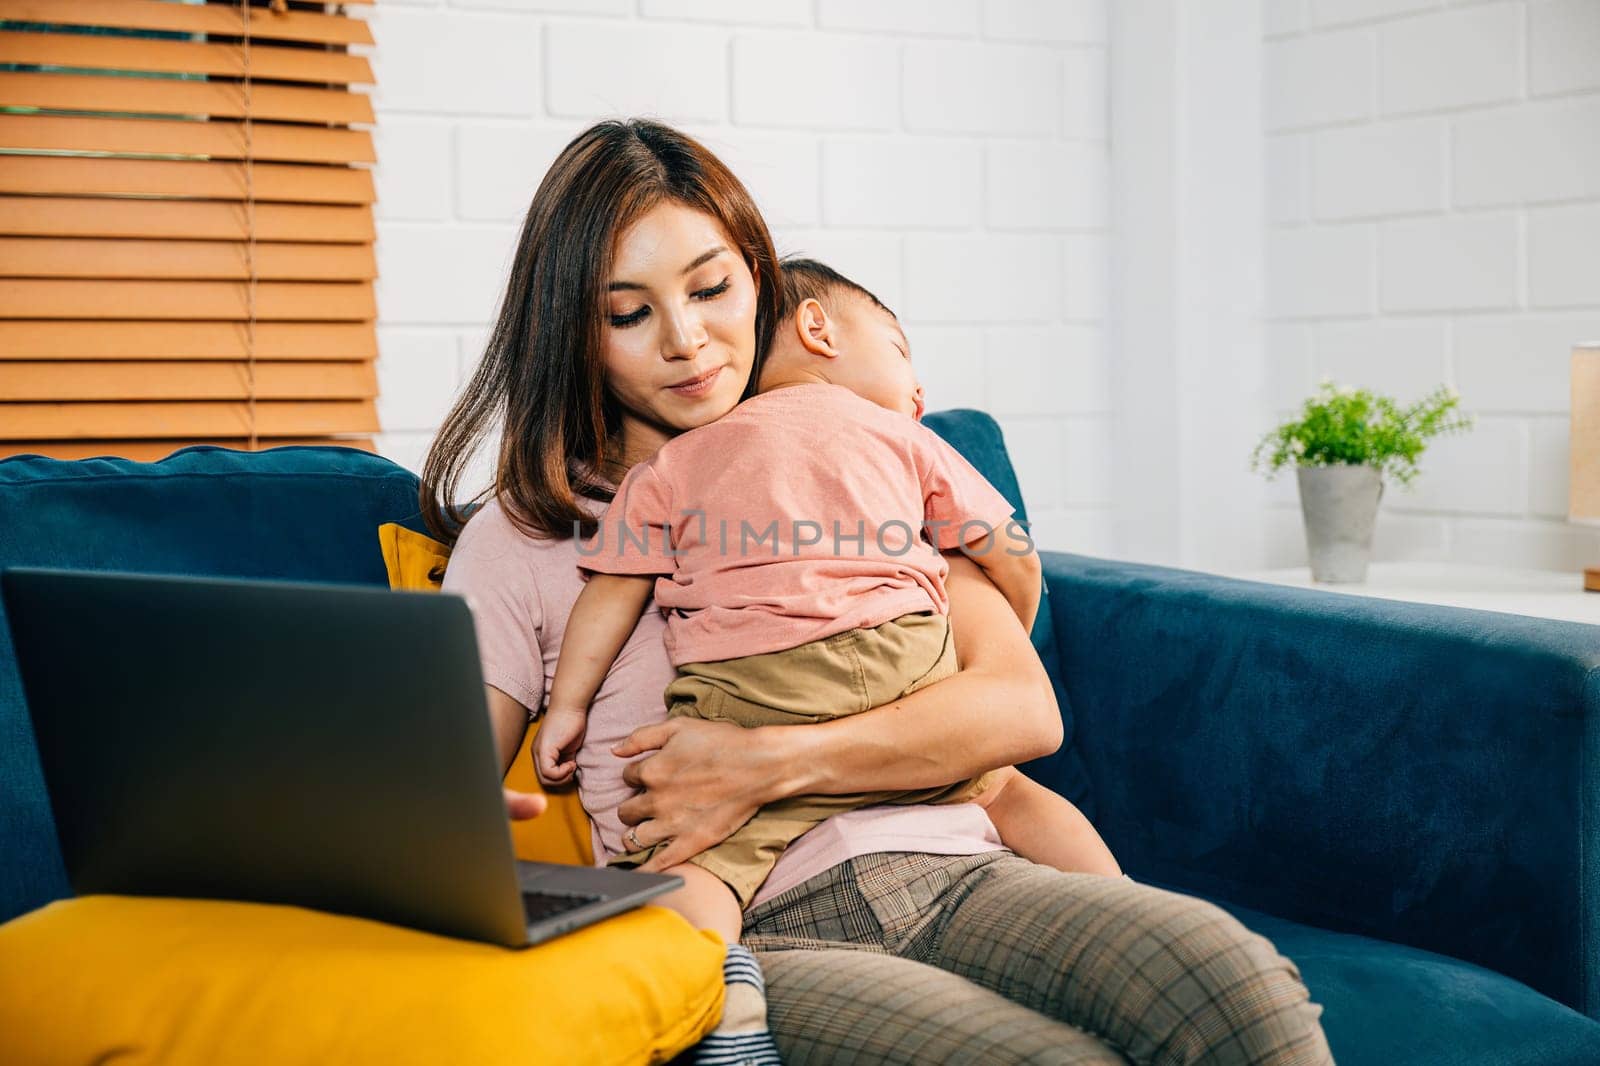 Balancing motherhood and work a businesswoman types on her laptop as her baby daughter peacefully naps on the sofa. This portrait captures their loving bond.